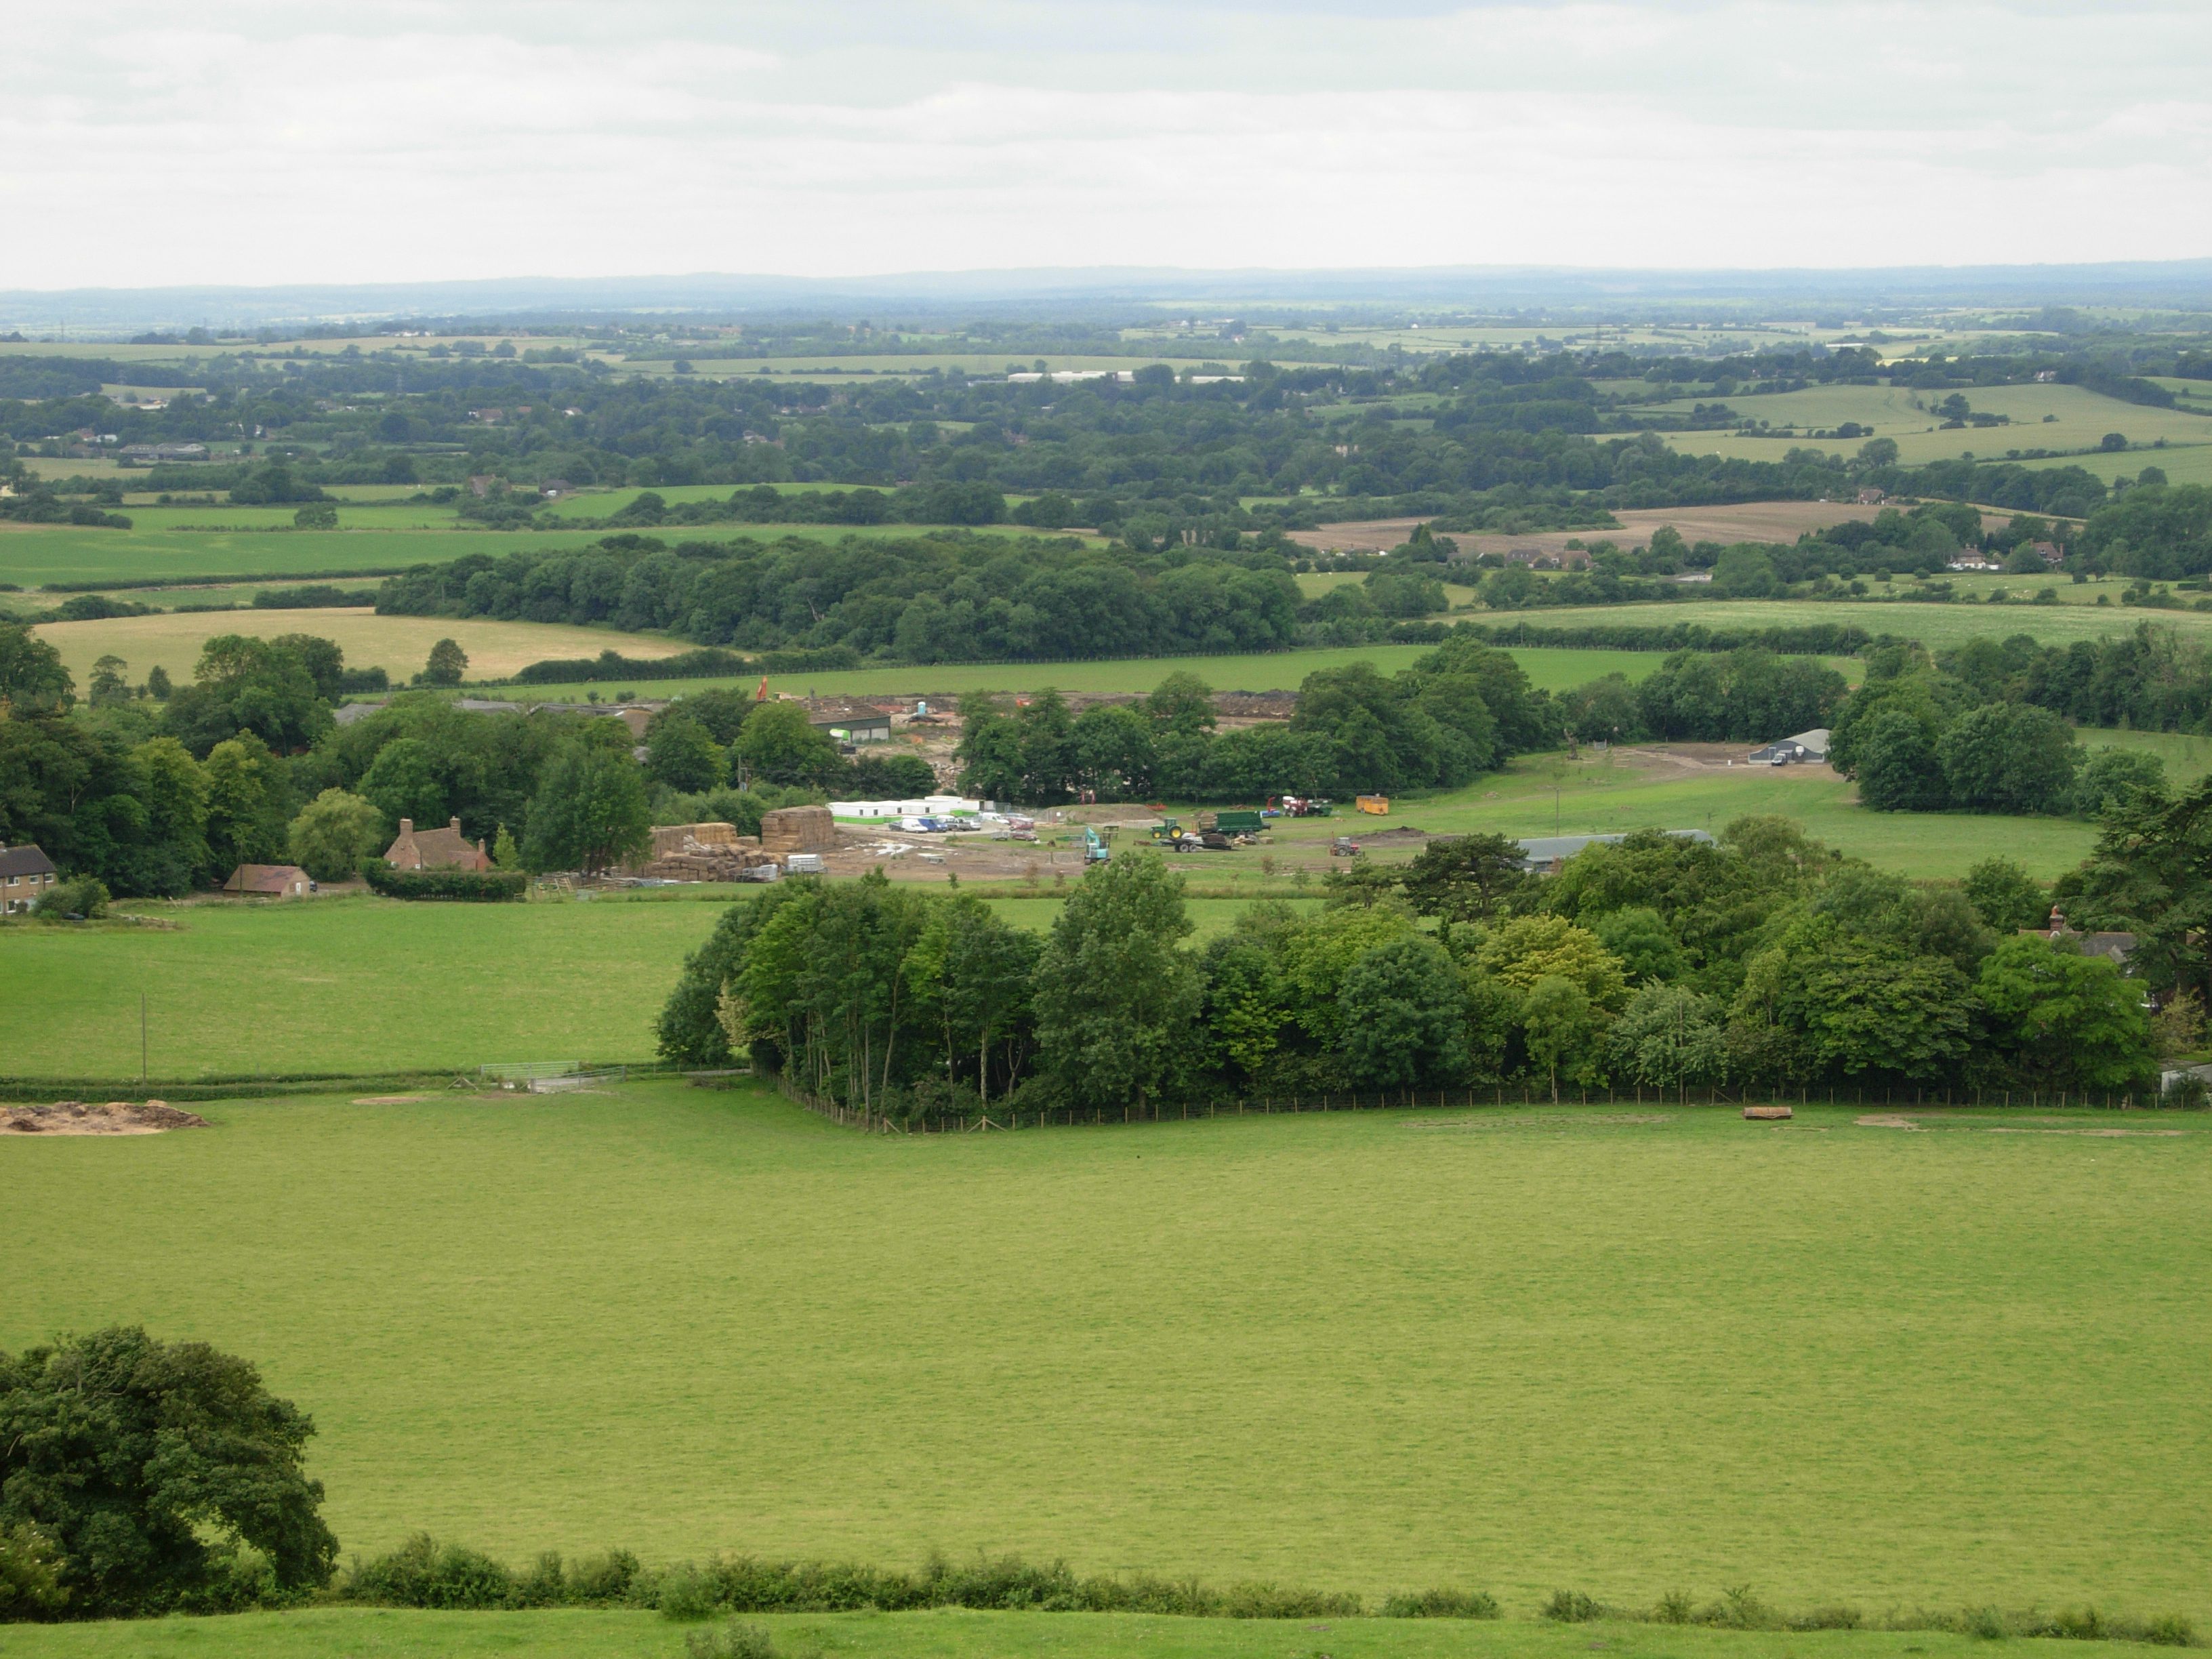 View of green fields, some woodlands and houses in distance.